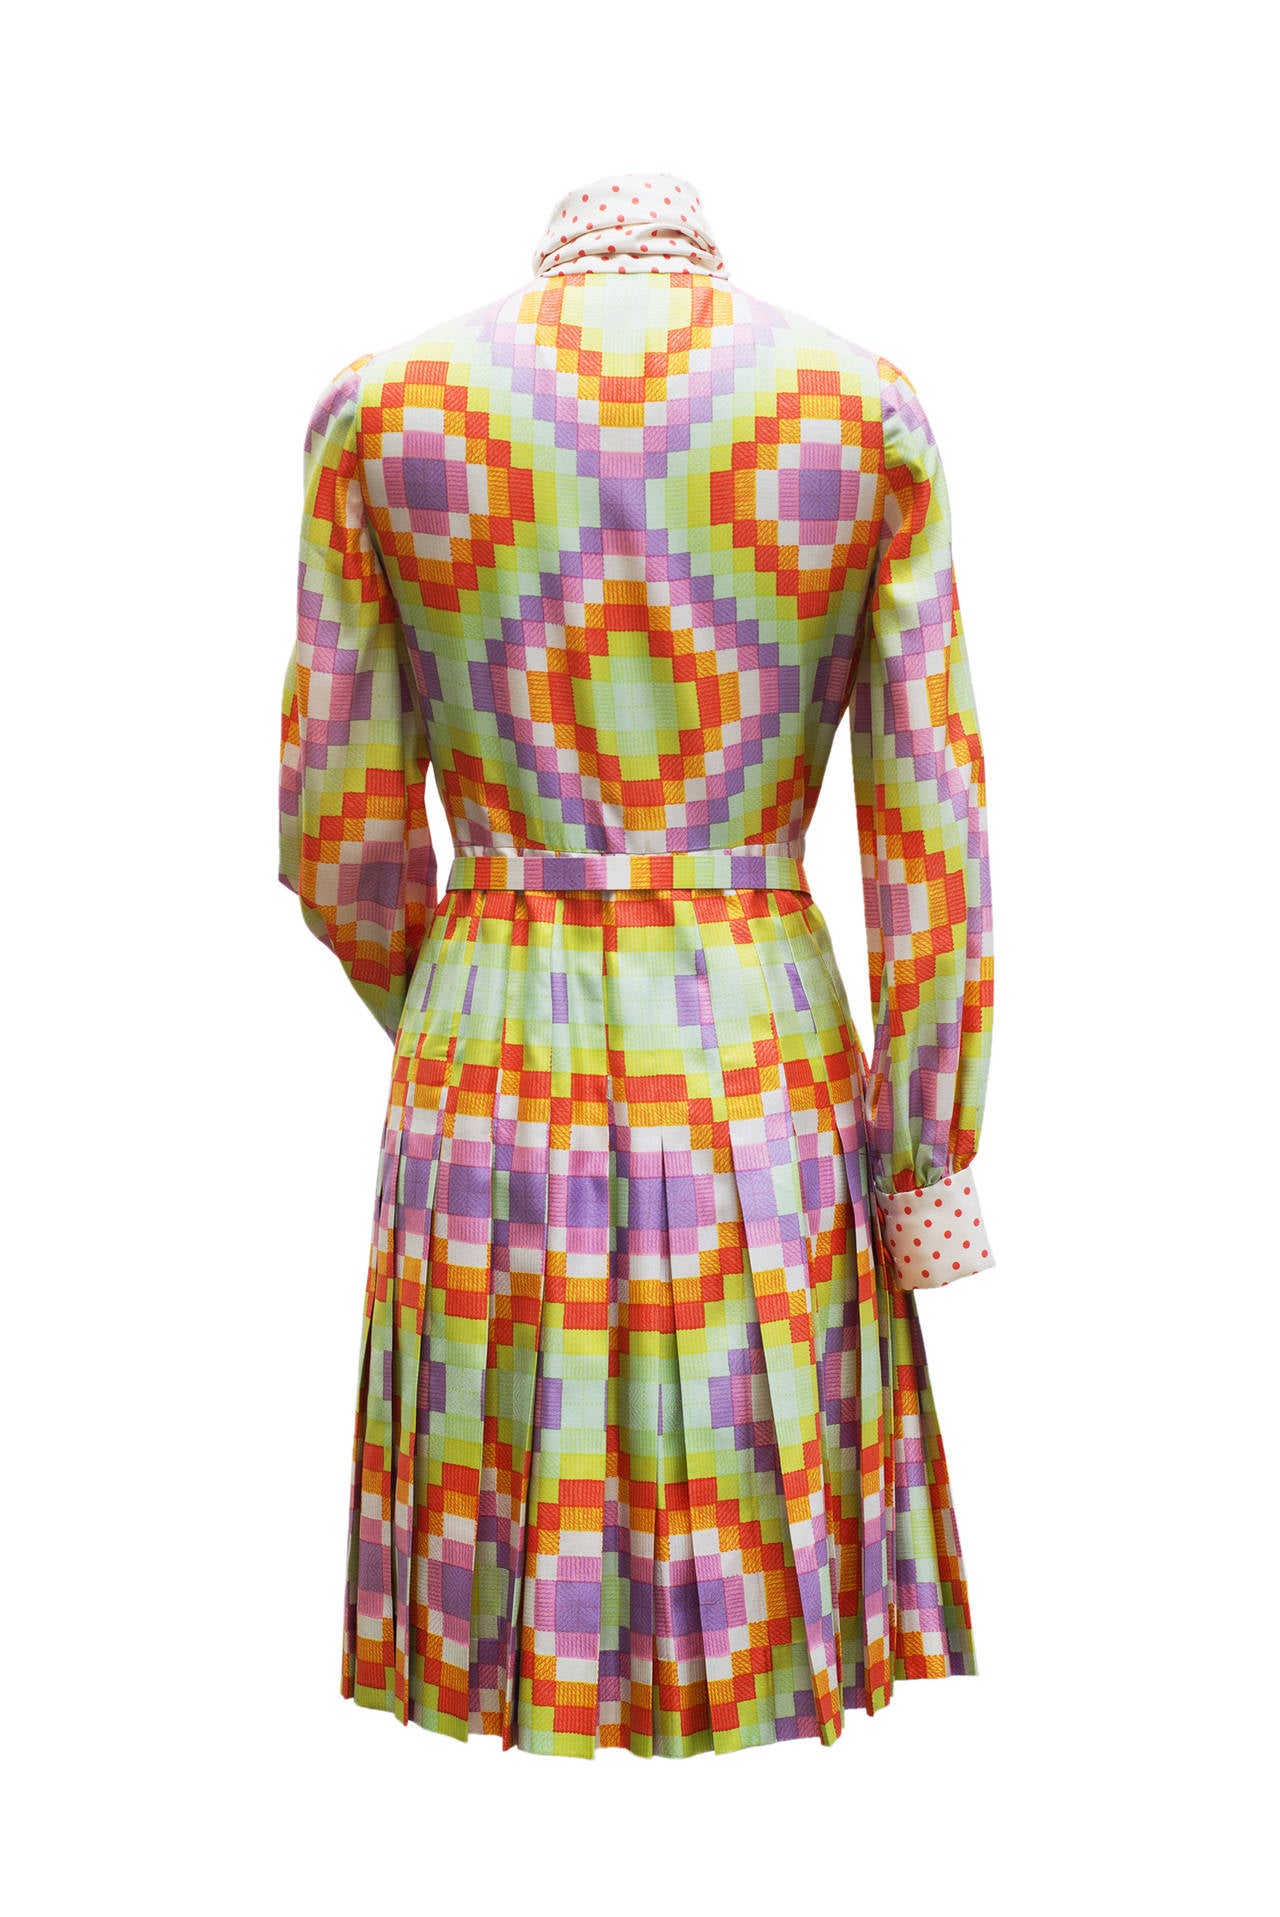 1970  Jeanne Lanvin Haute Couture Divine Silk Day Dress :

This divine day dress have a tie collar , long  sleeves ,and the shirt has pleats .
The waist is marked by a small belt in the same fabric